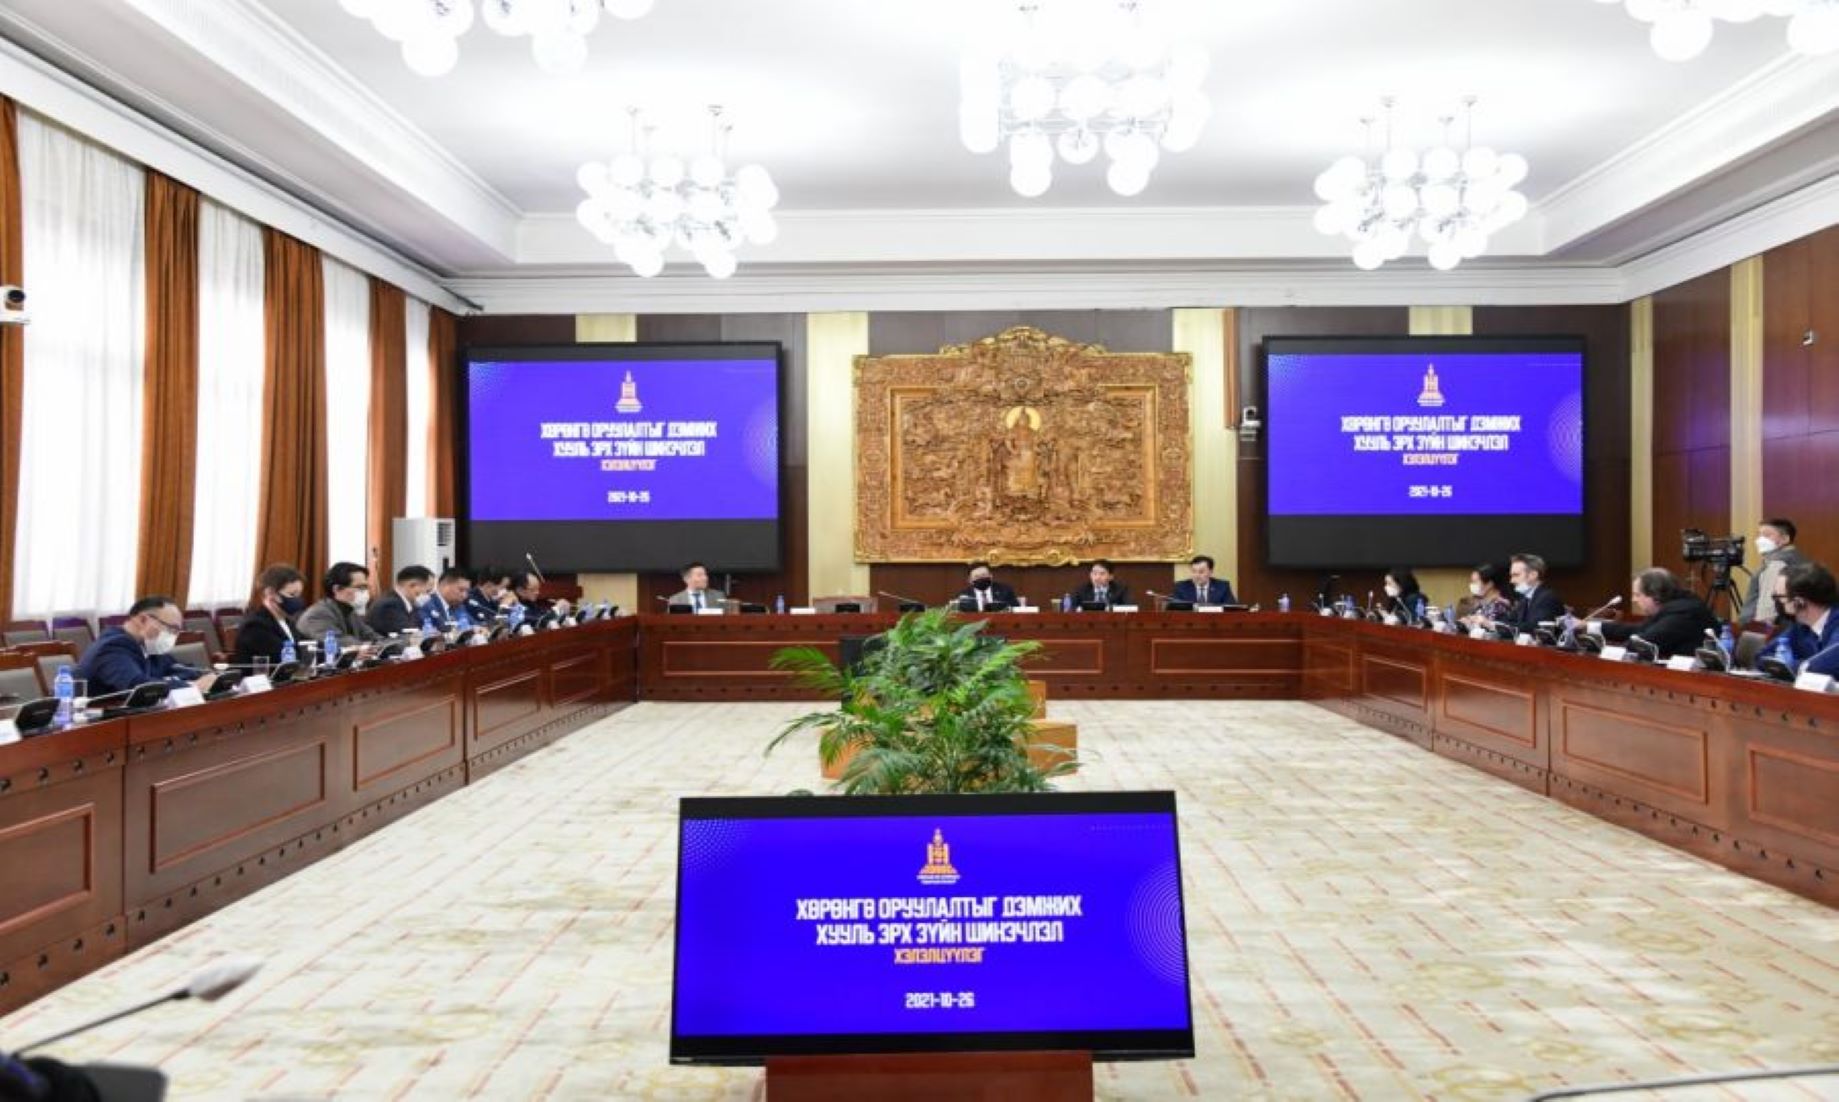 Mongolia To Establish Agency For Investment, Trade To Attract Foreign Investment